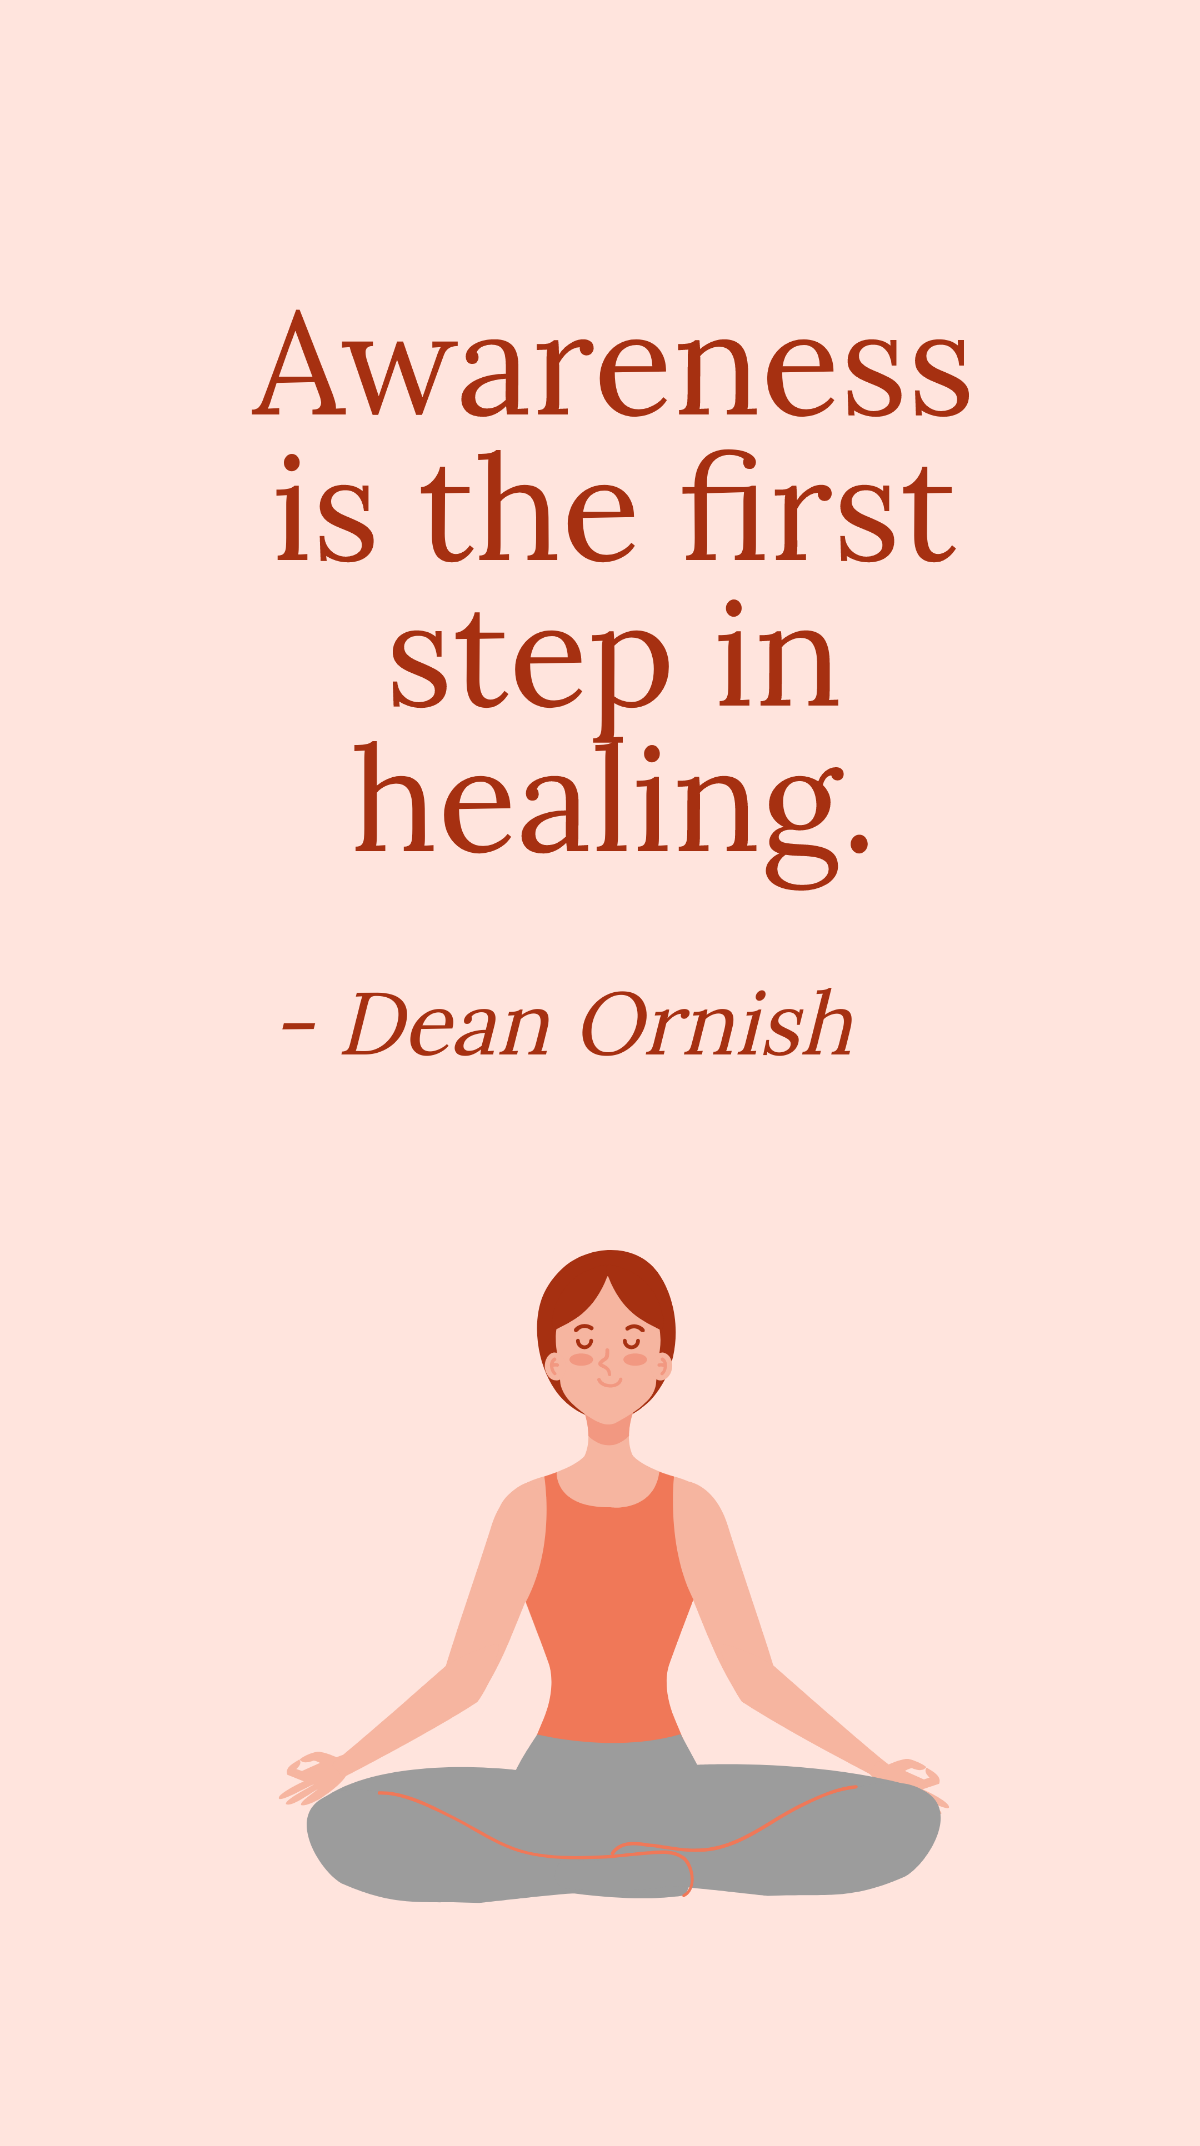 Dean Ornish - Awareness is the first step in healing. Template